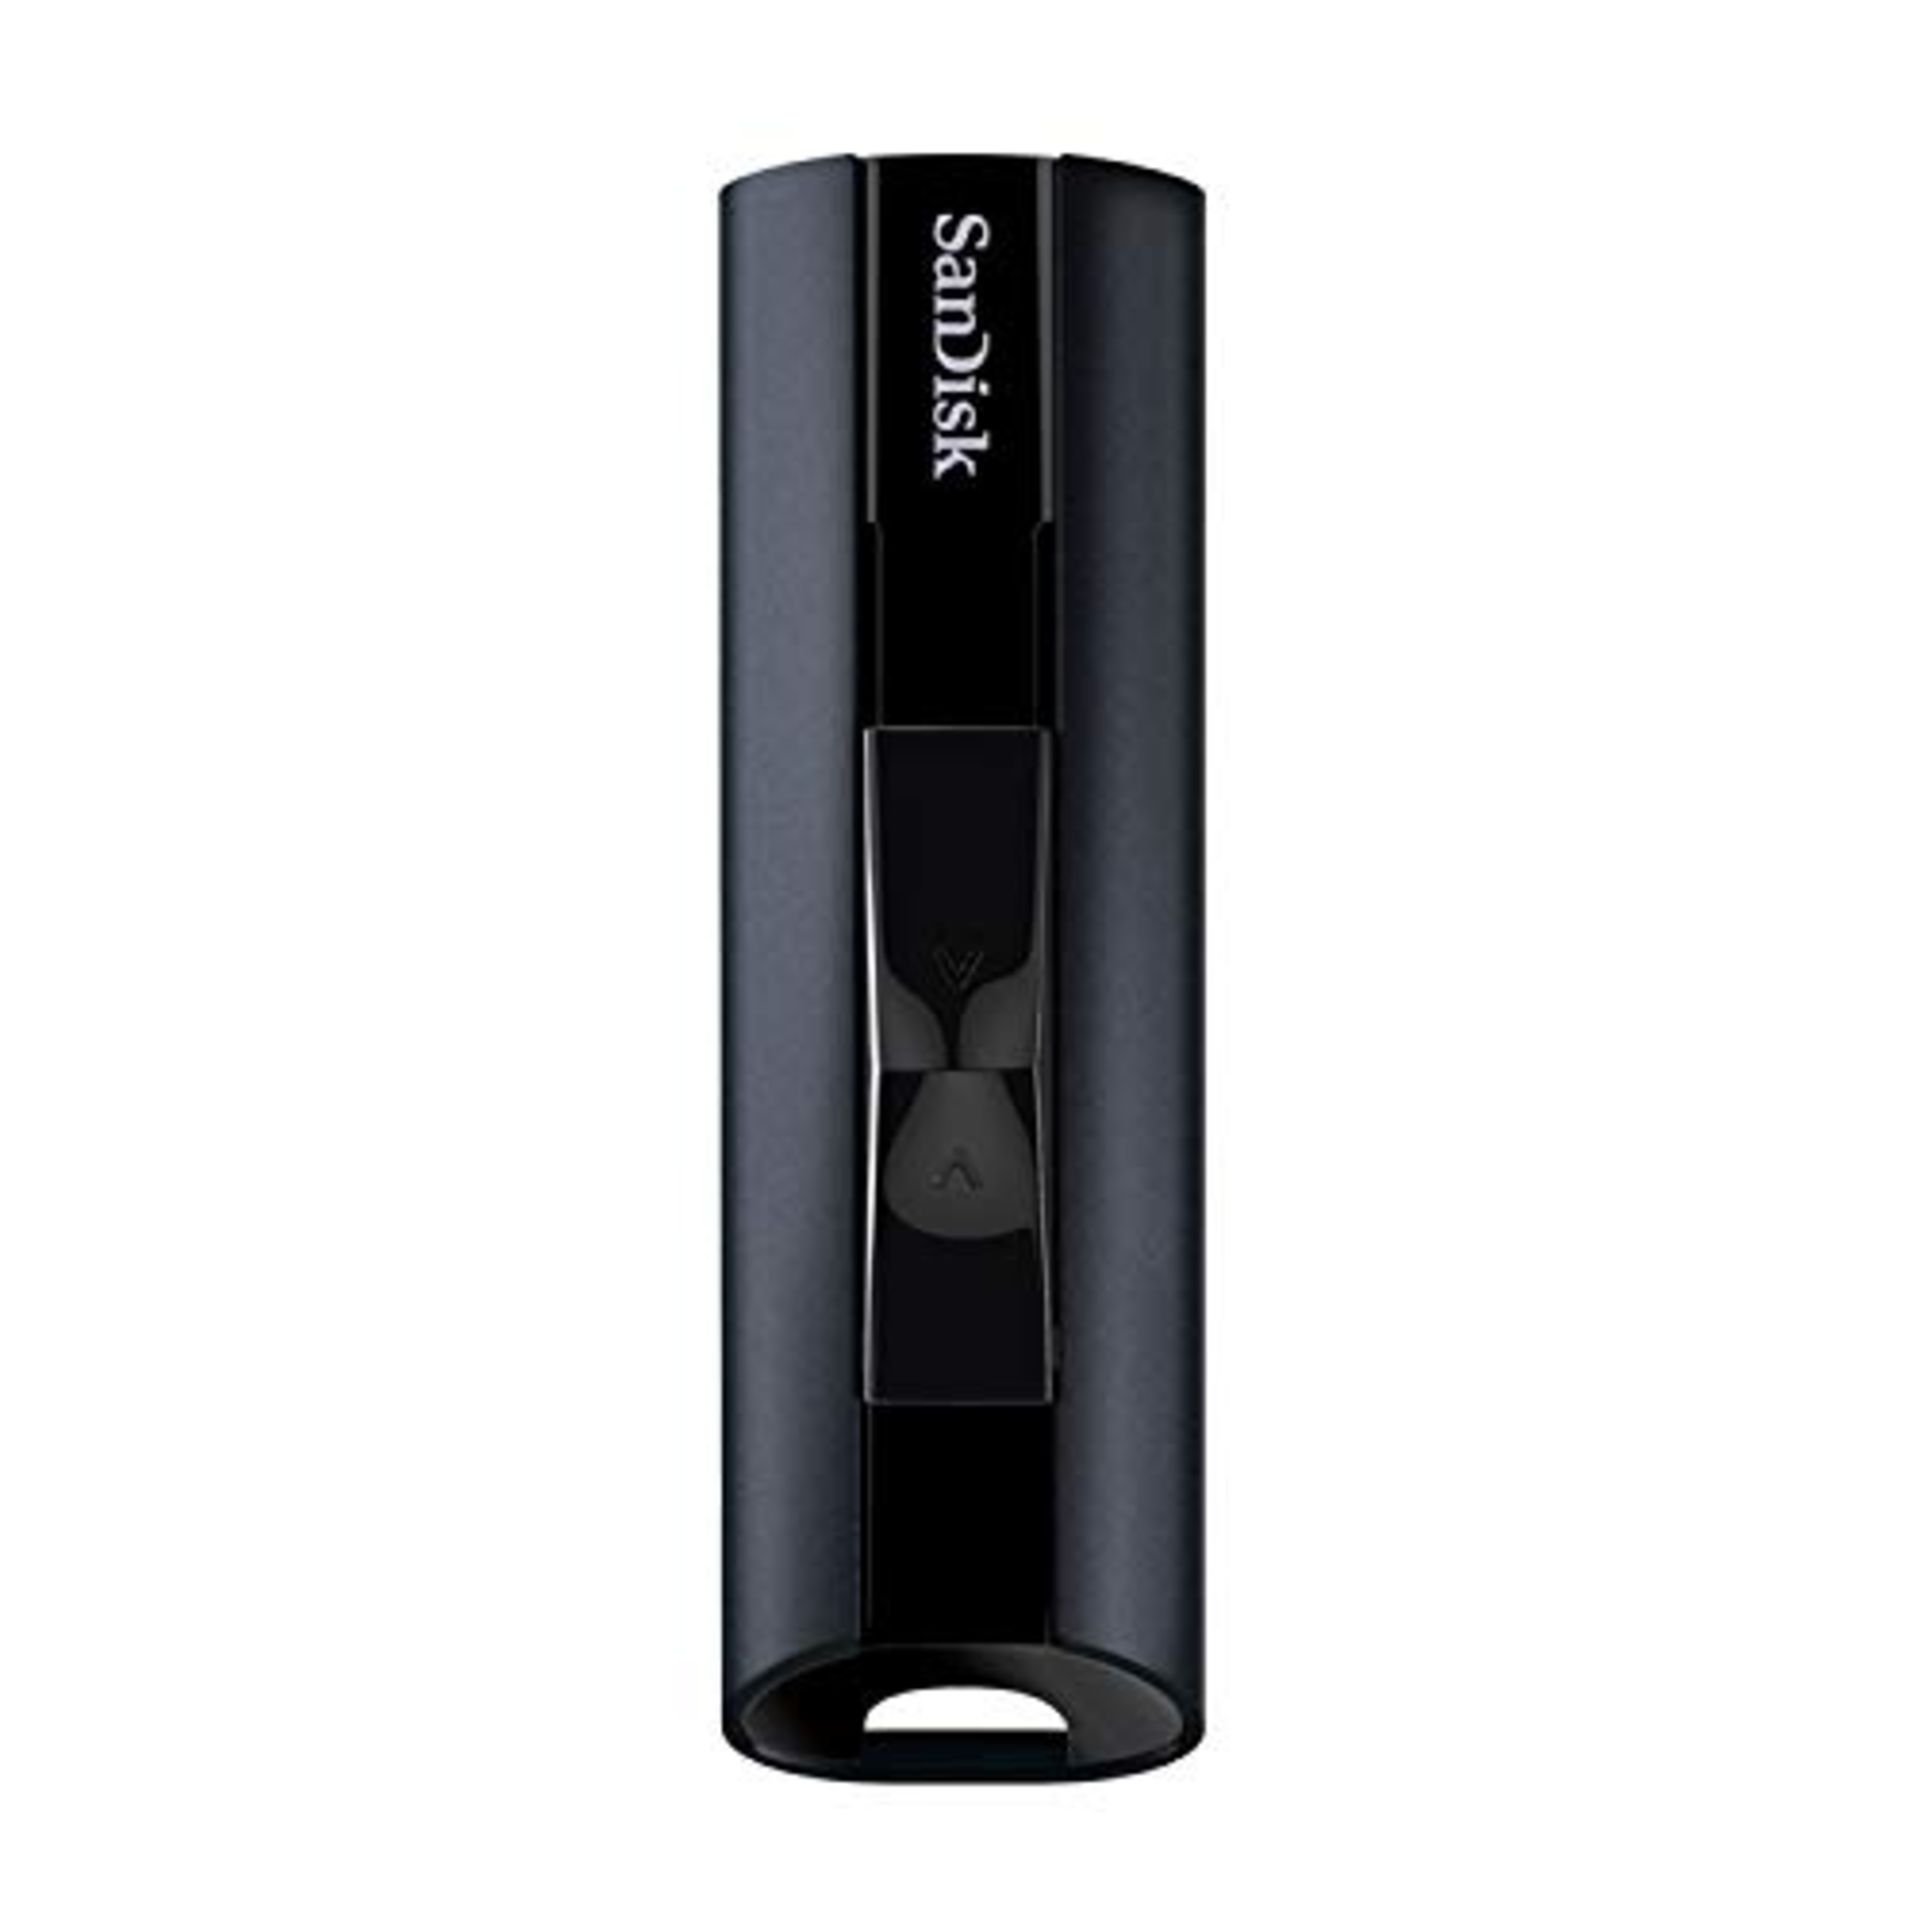 SanDisk Extreme PRO 128GB: a USB 3.2 SSD flash drive with read speeds of up to 420MB/s